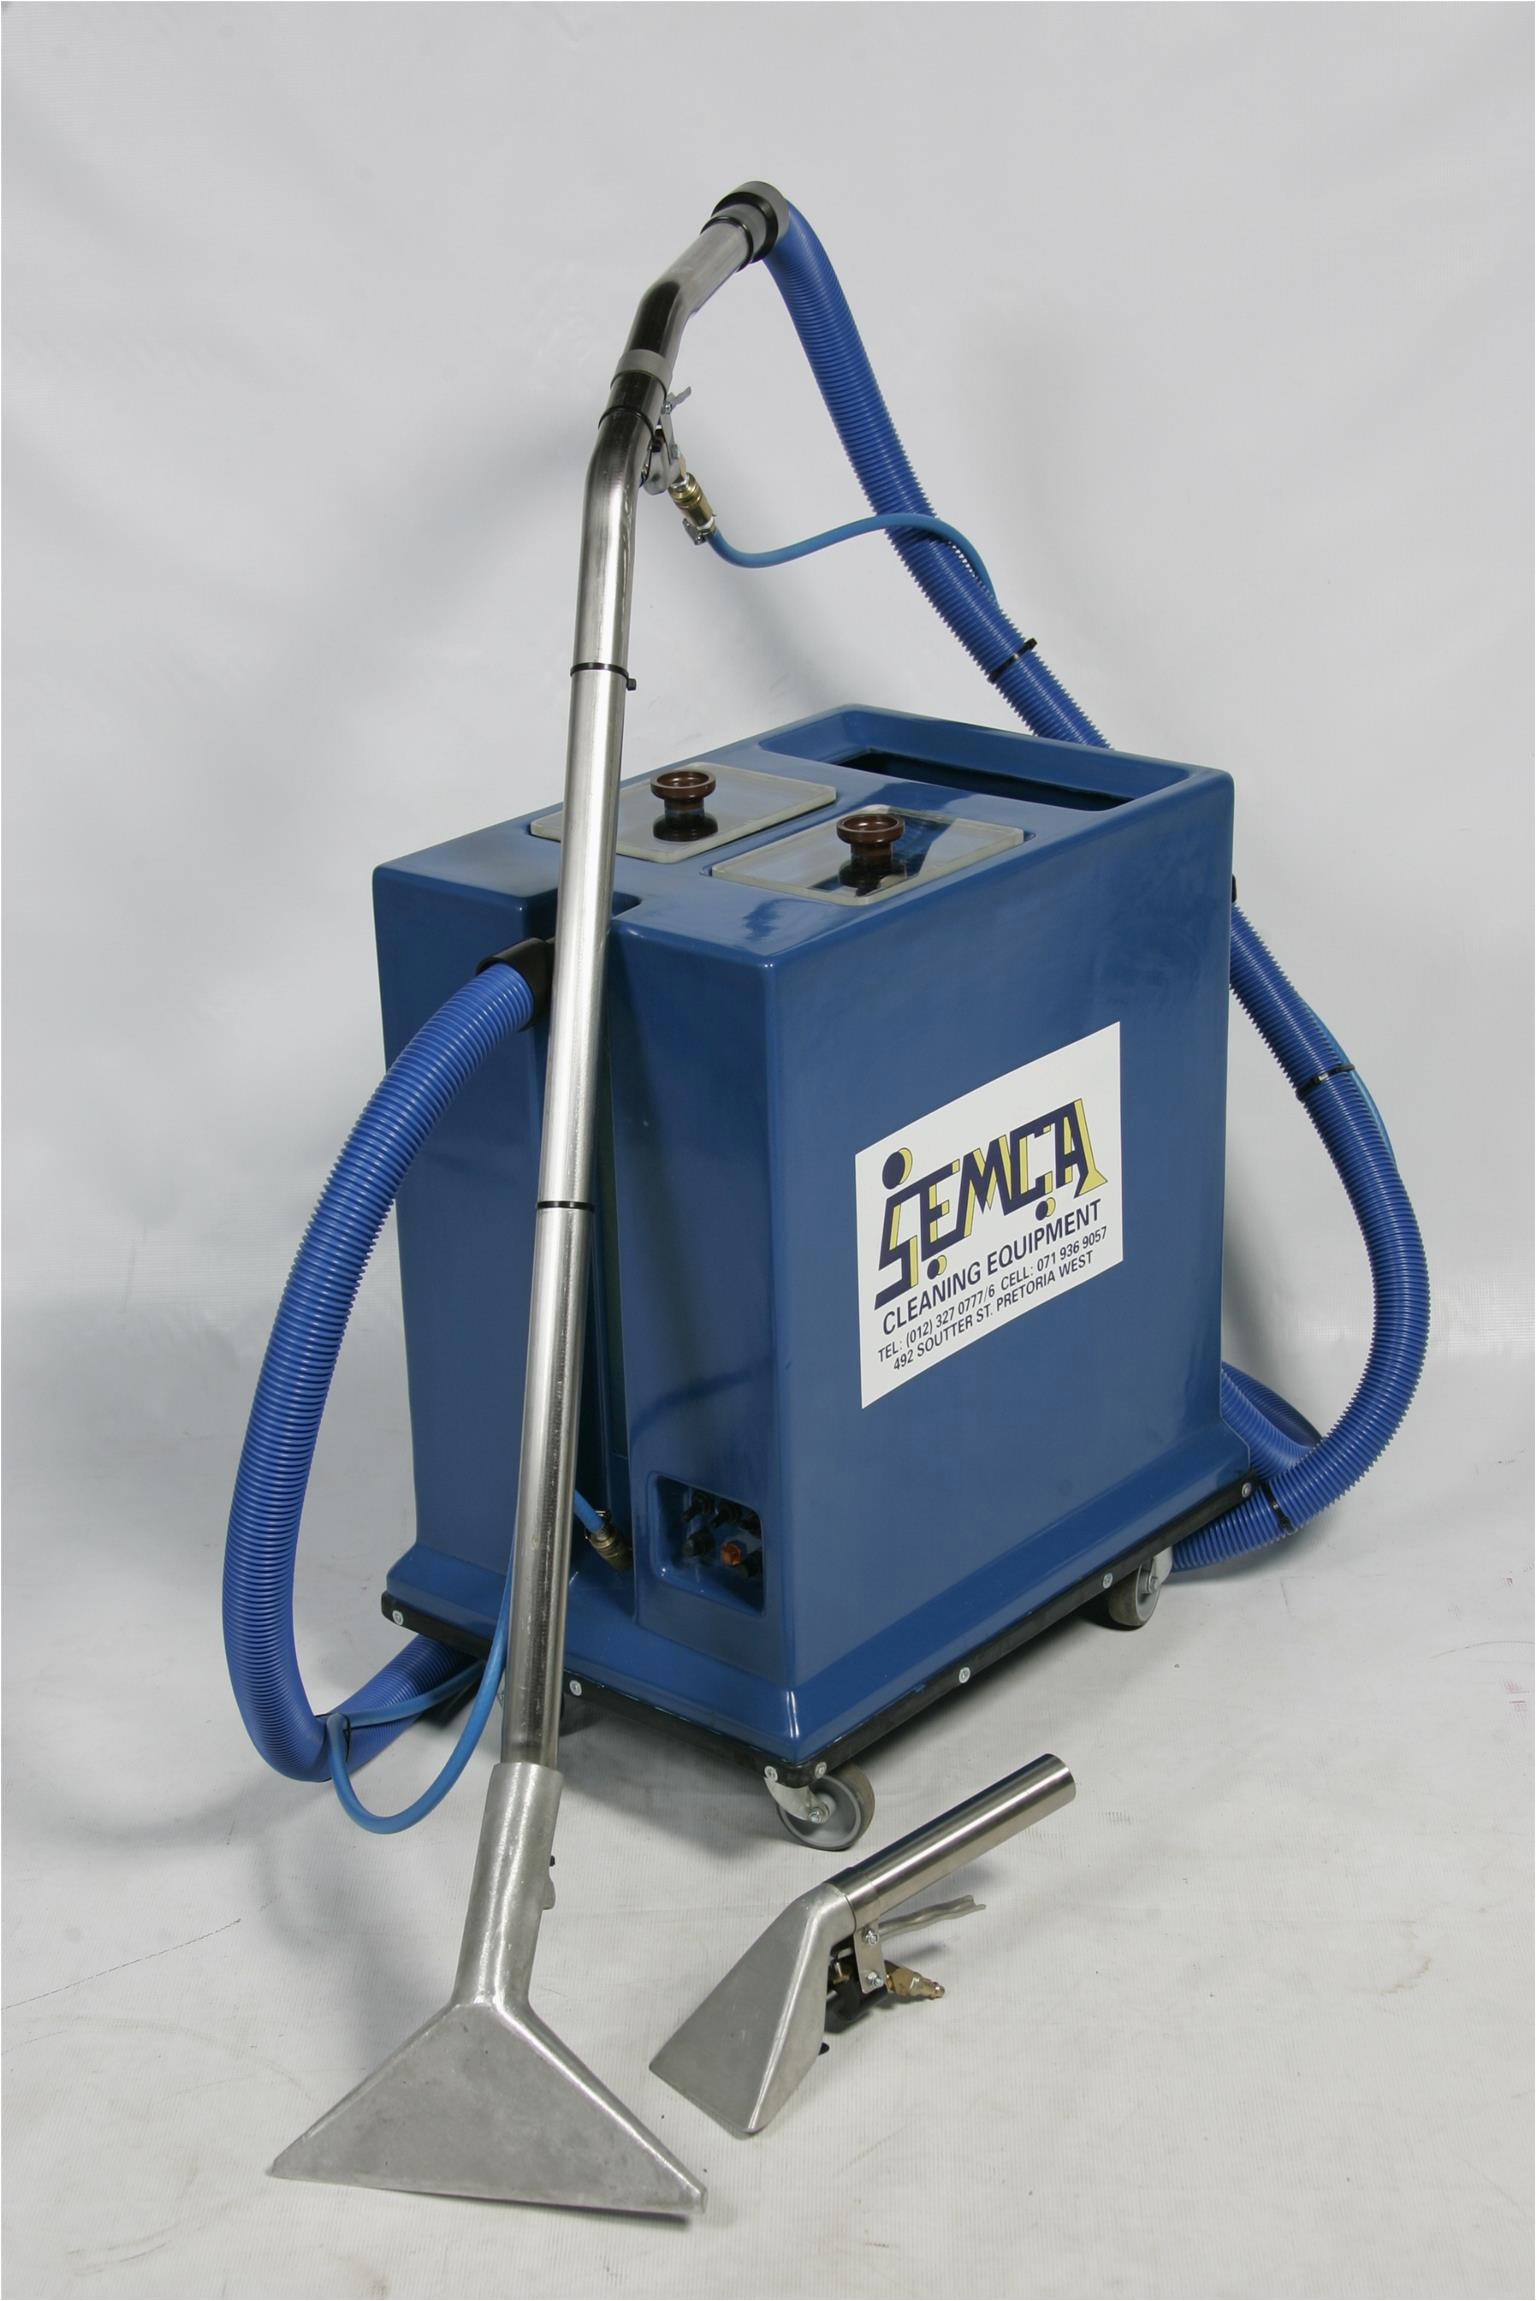 Used area Rug Cleaning Equipment for Sale Industrial Carpet Cleaning Machine